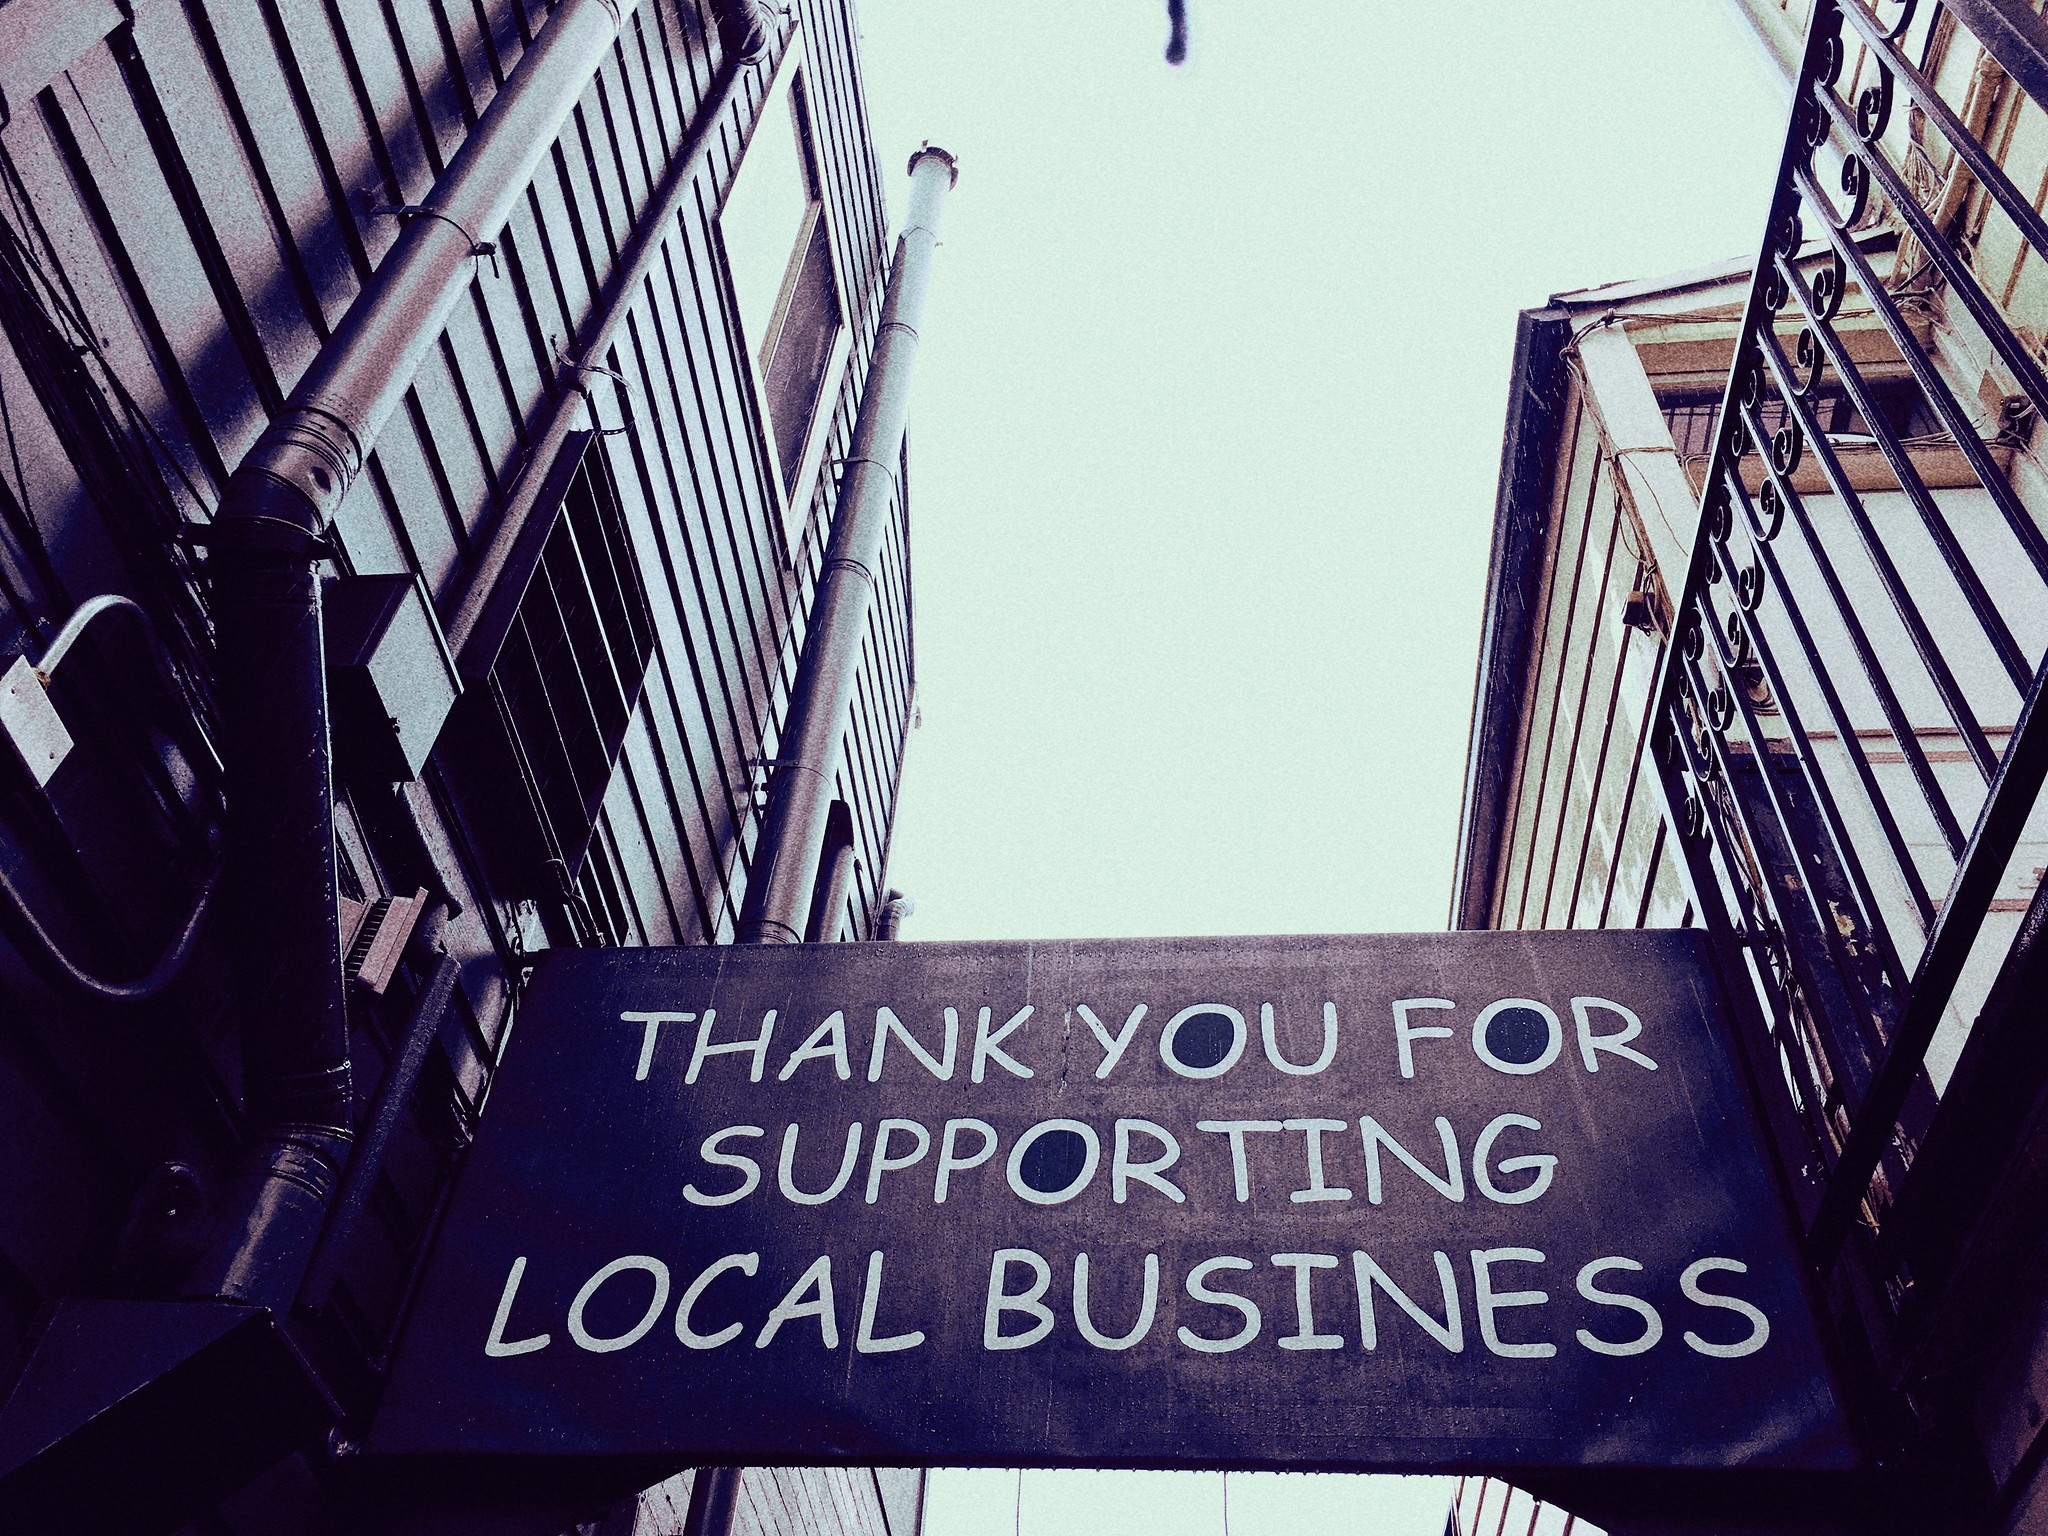 sign asking for support for local businesses